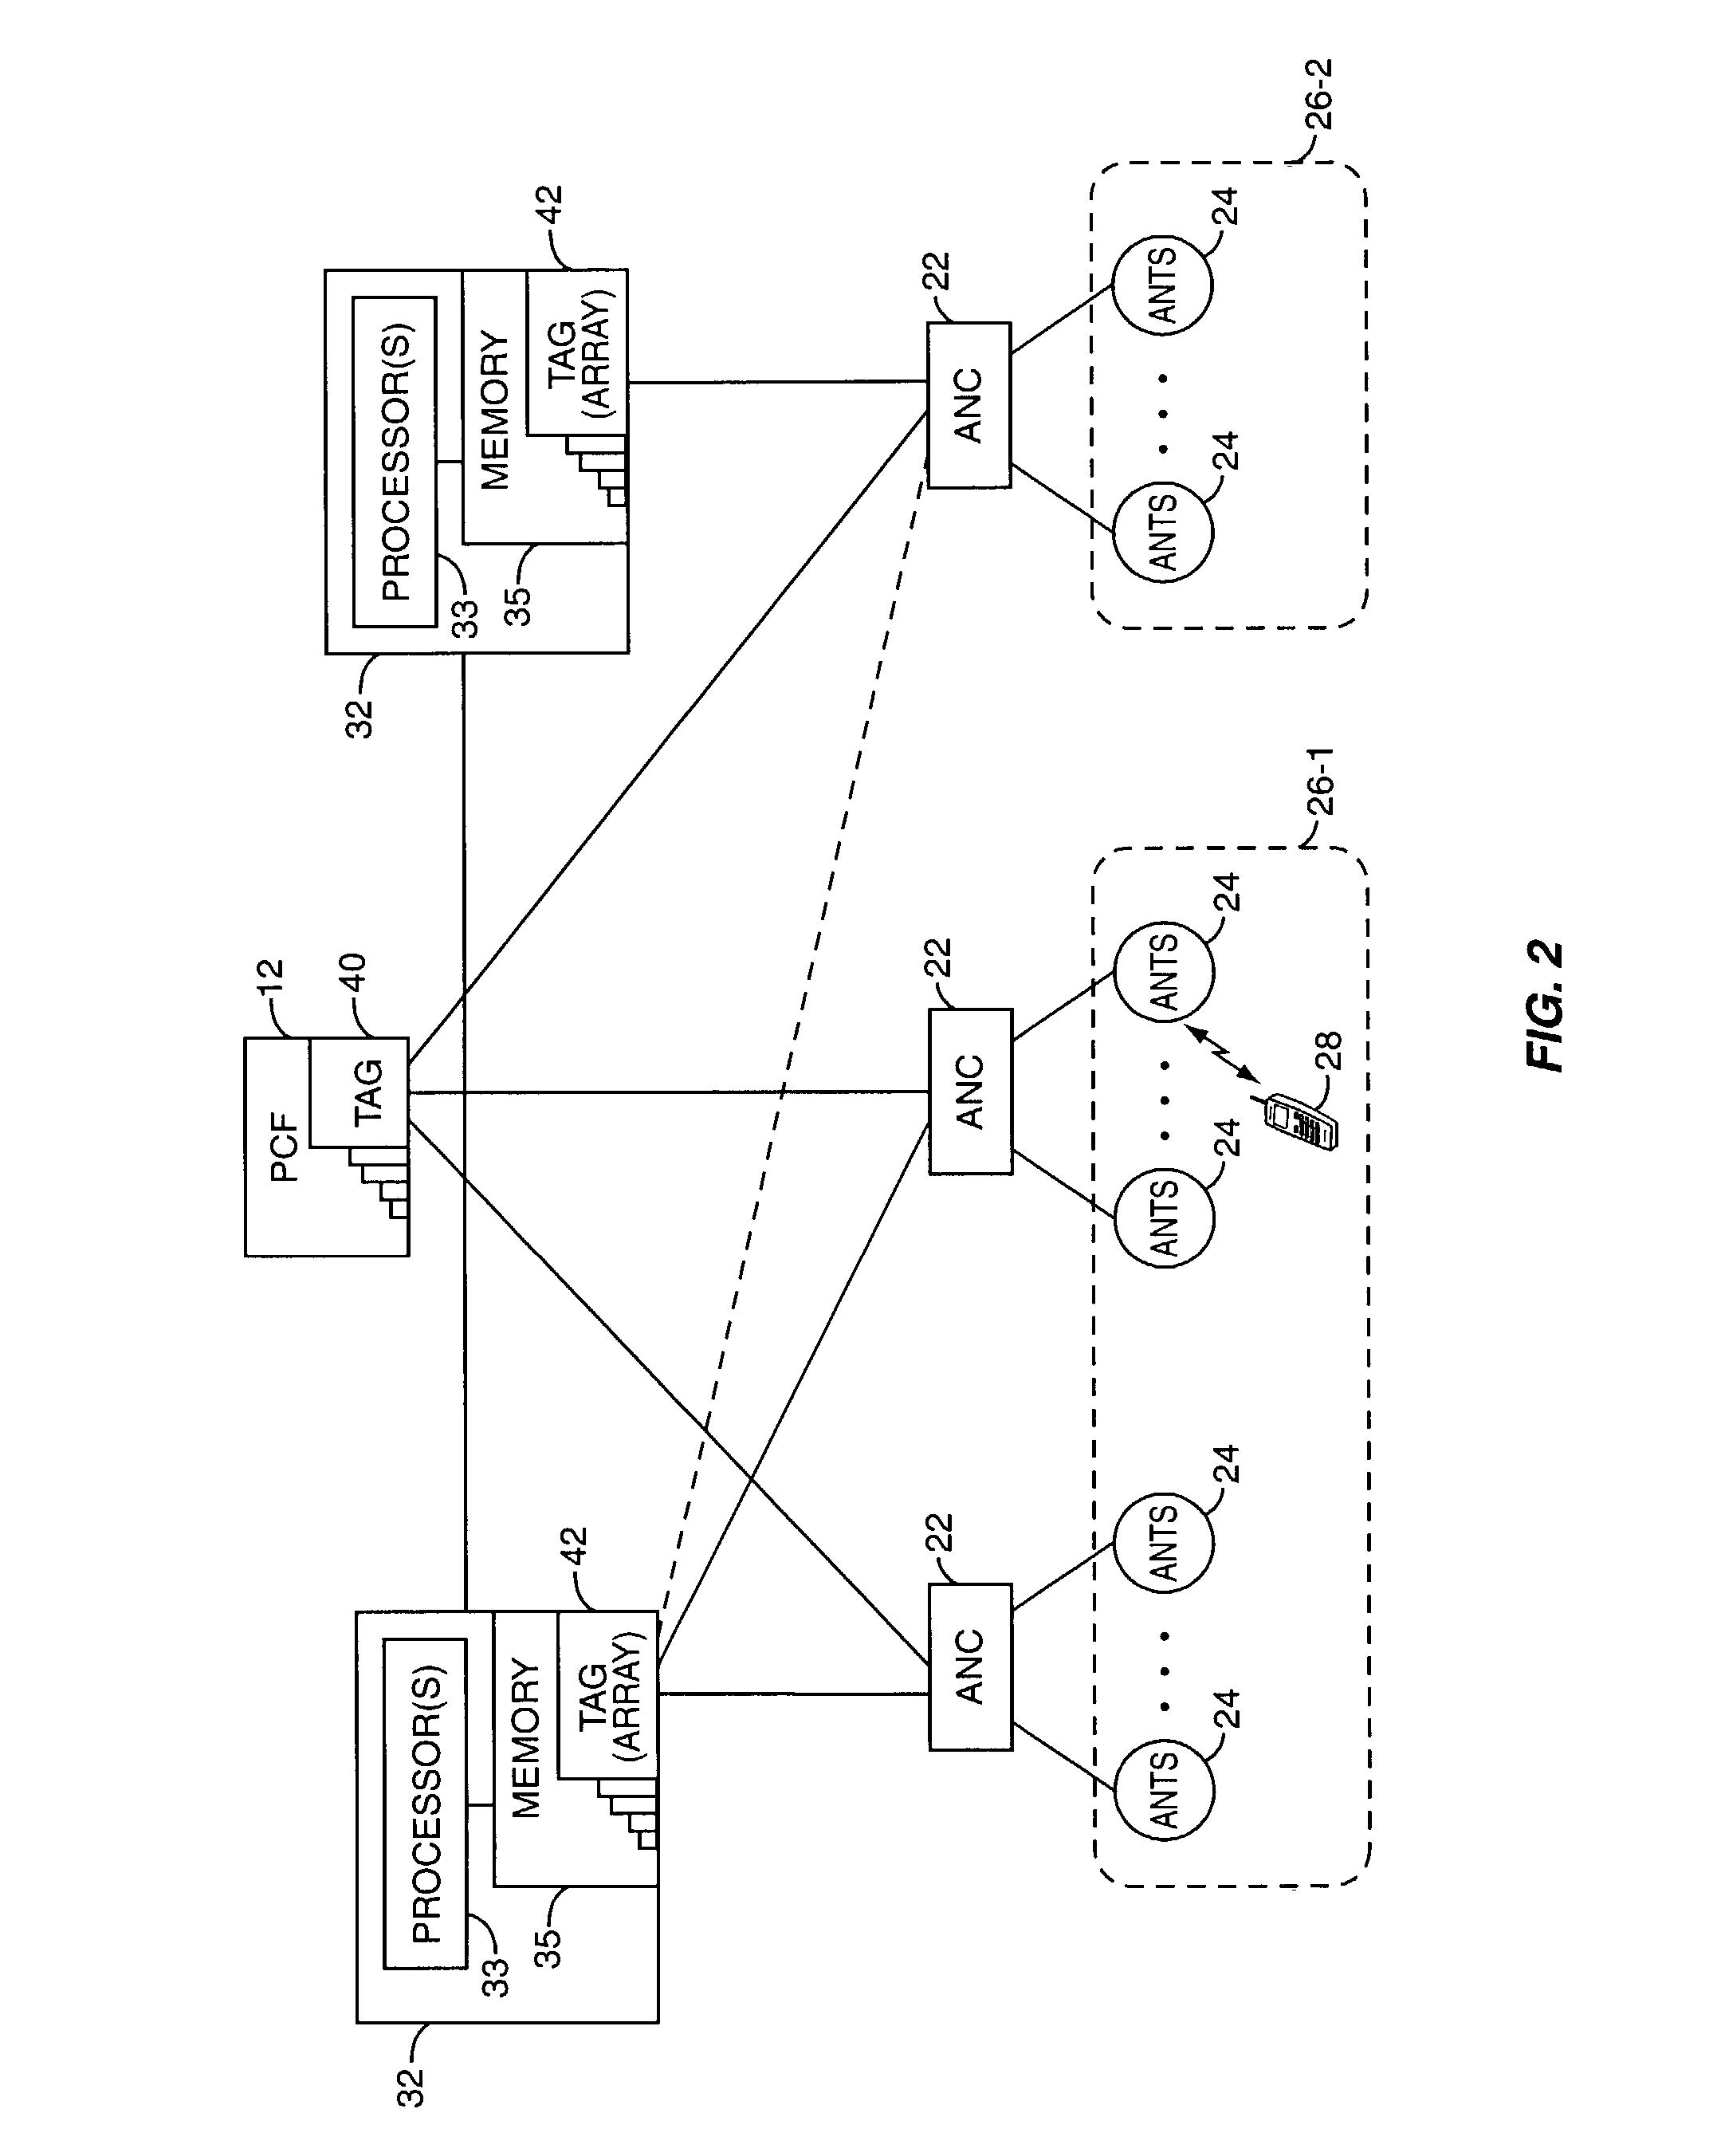 Mobility management entity for high data rate wireless communication networks